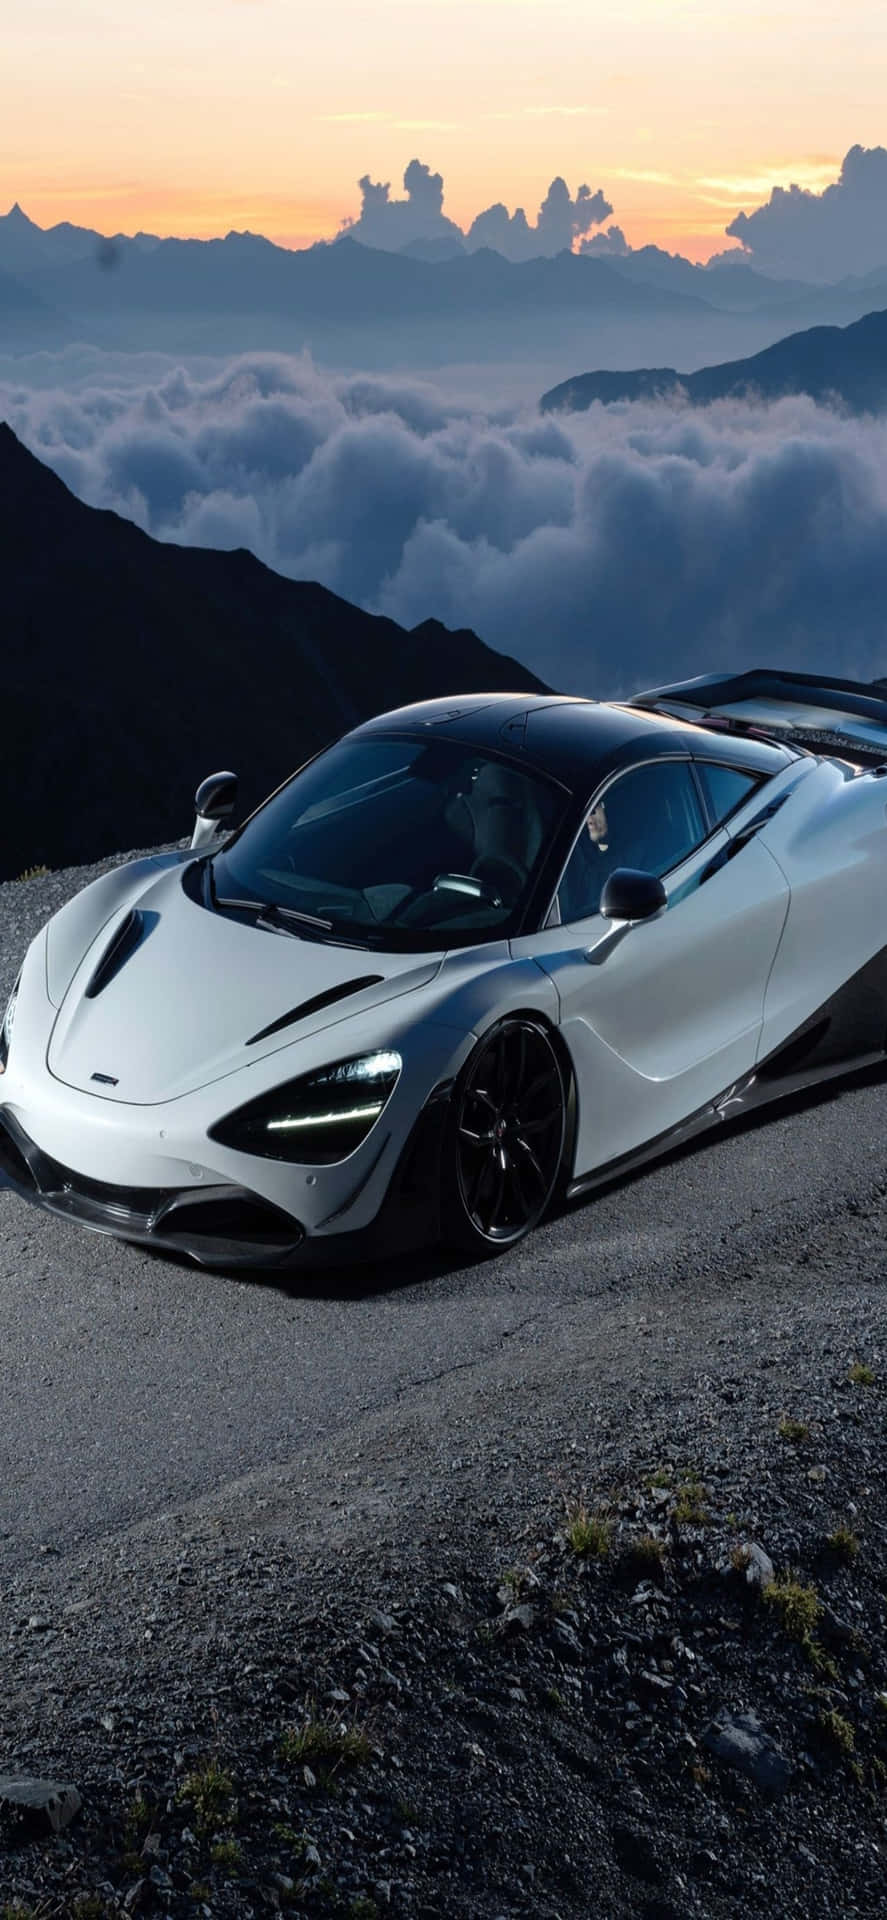 The Fastest Combination of Technology - Iphone Xs and McLaren 720s